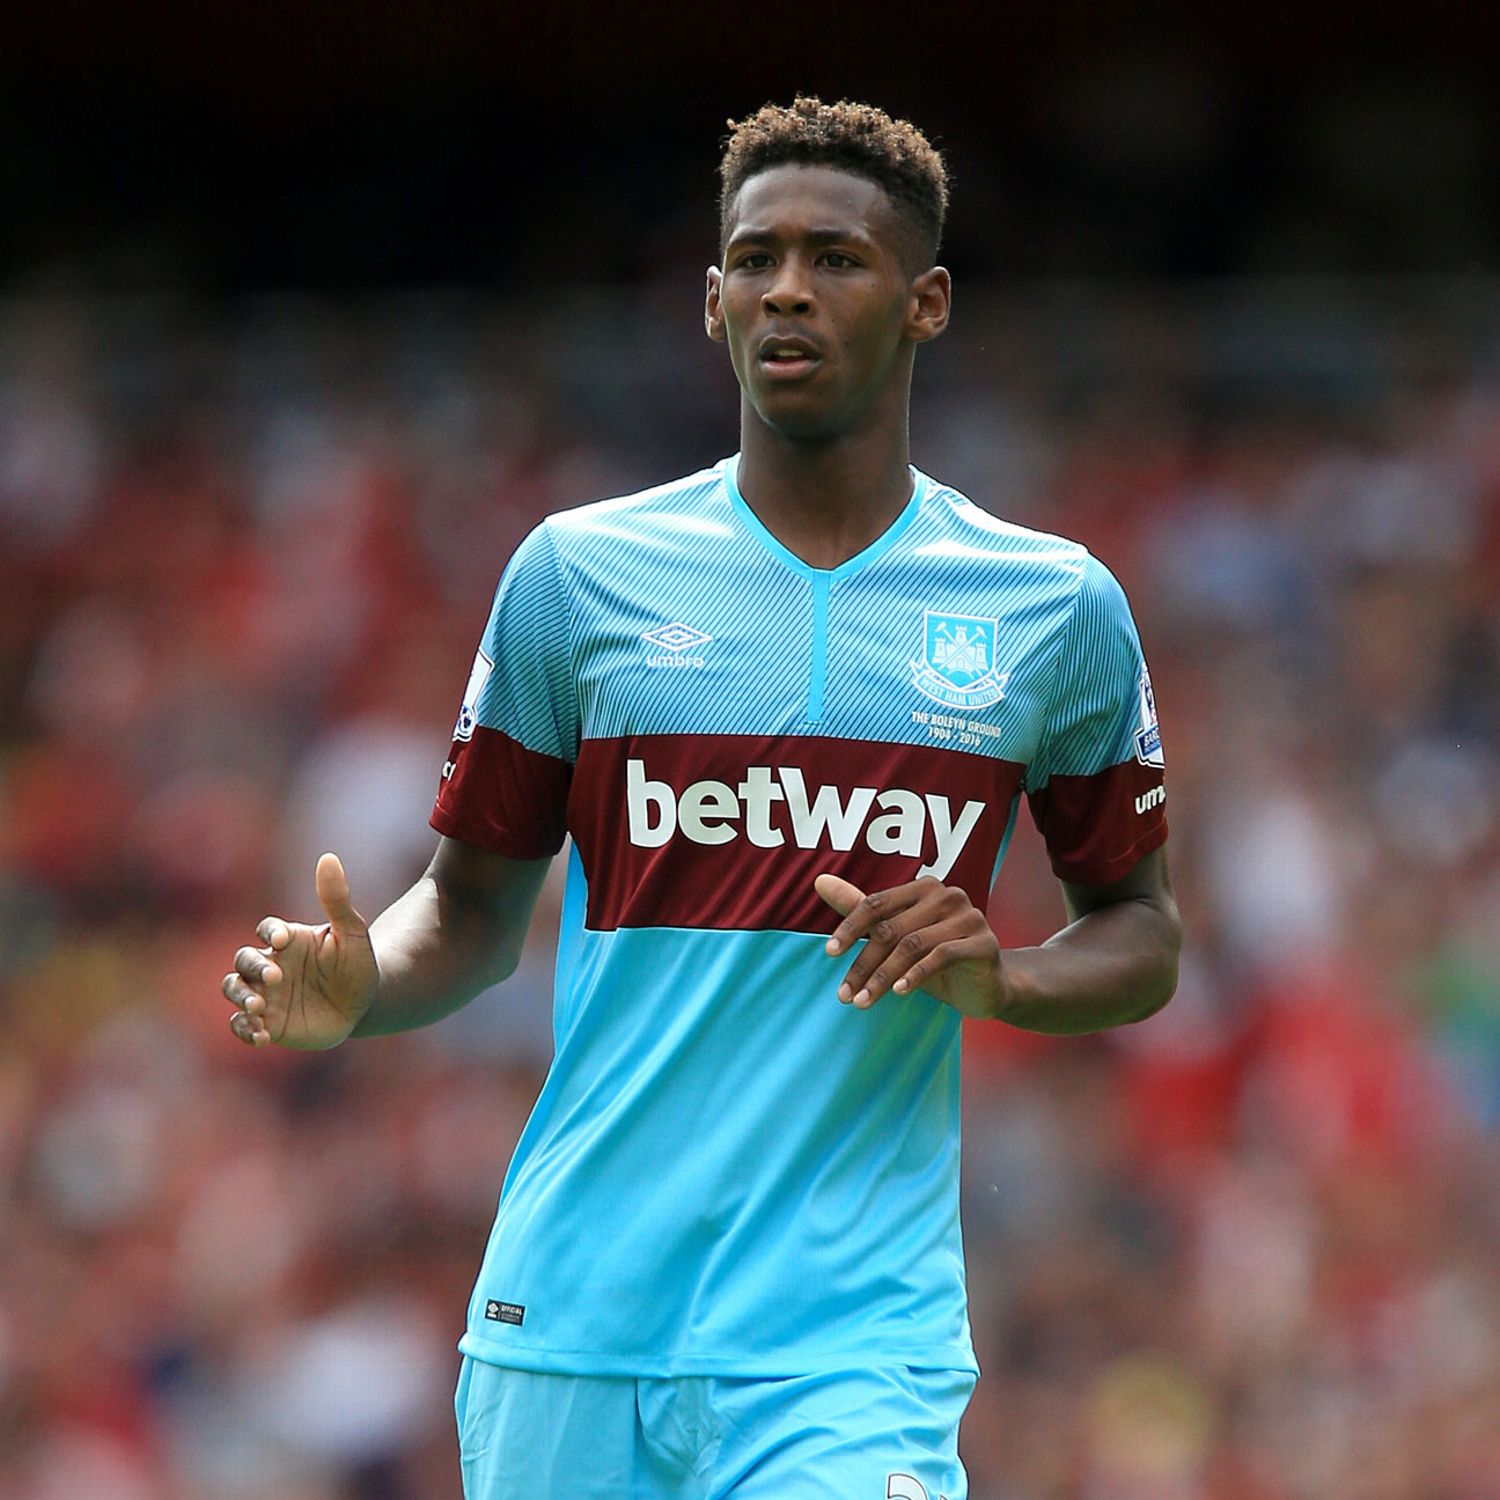 West Ham youth Reece Oxford a target for Man City - sources - ESPN FC